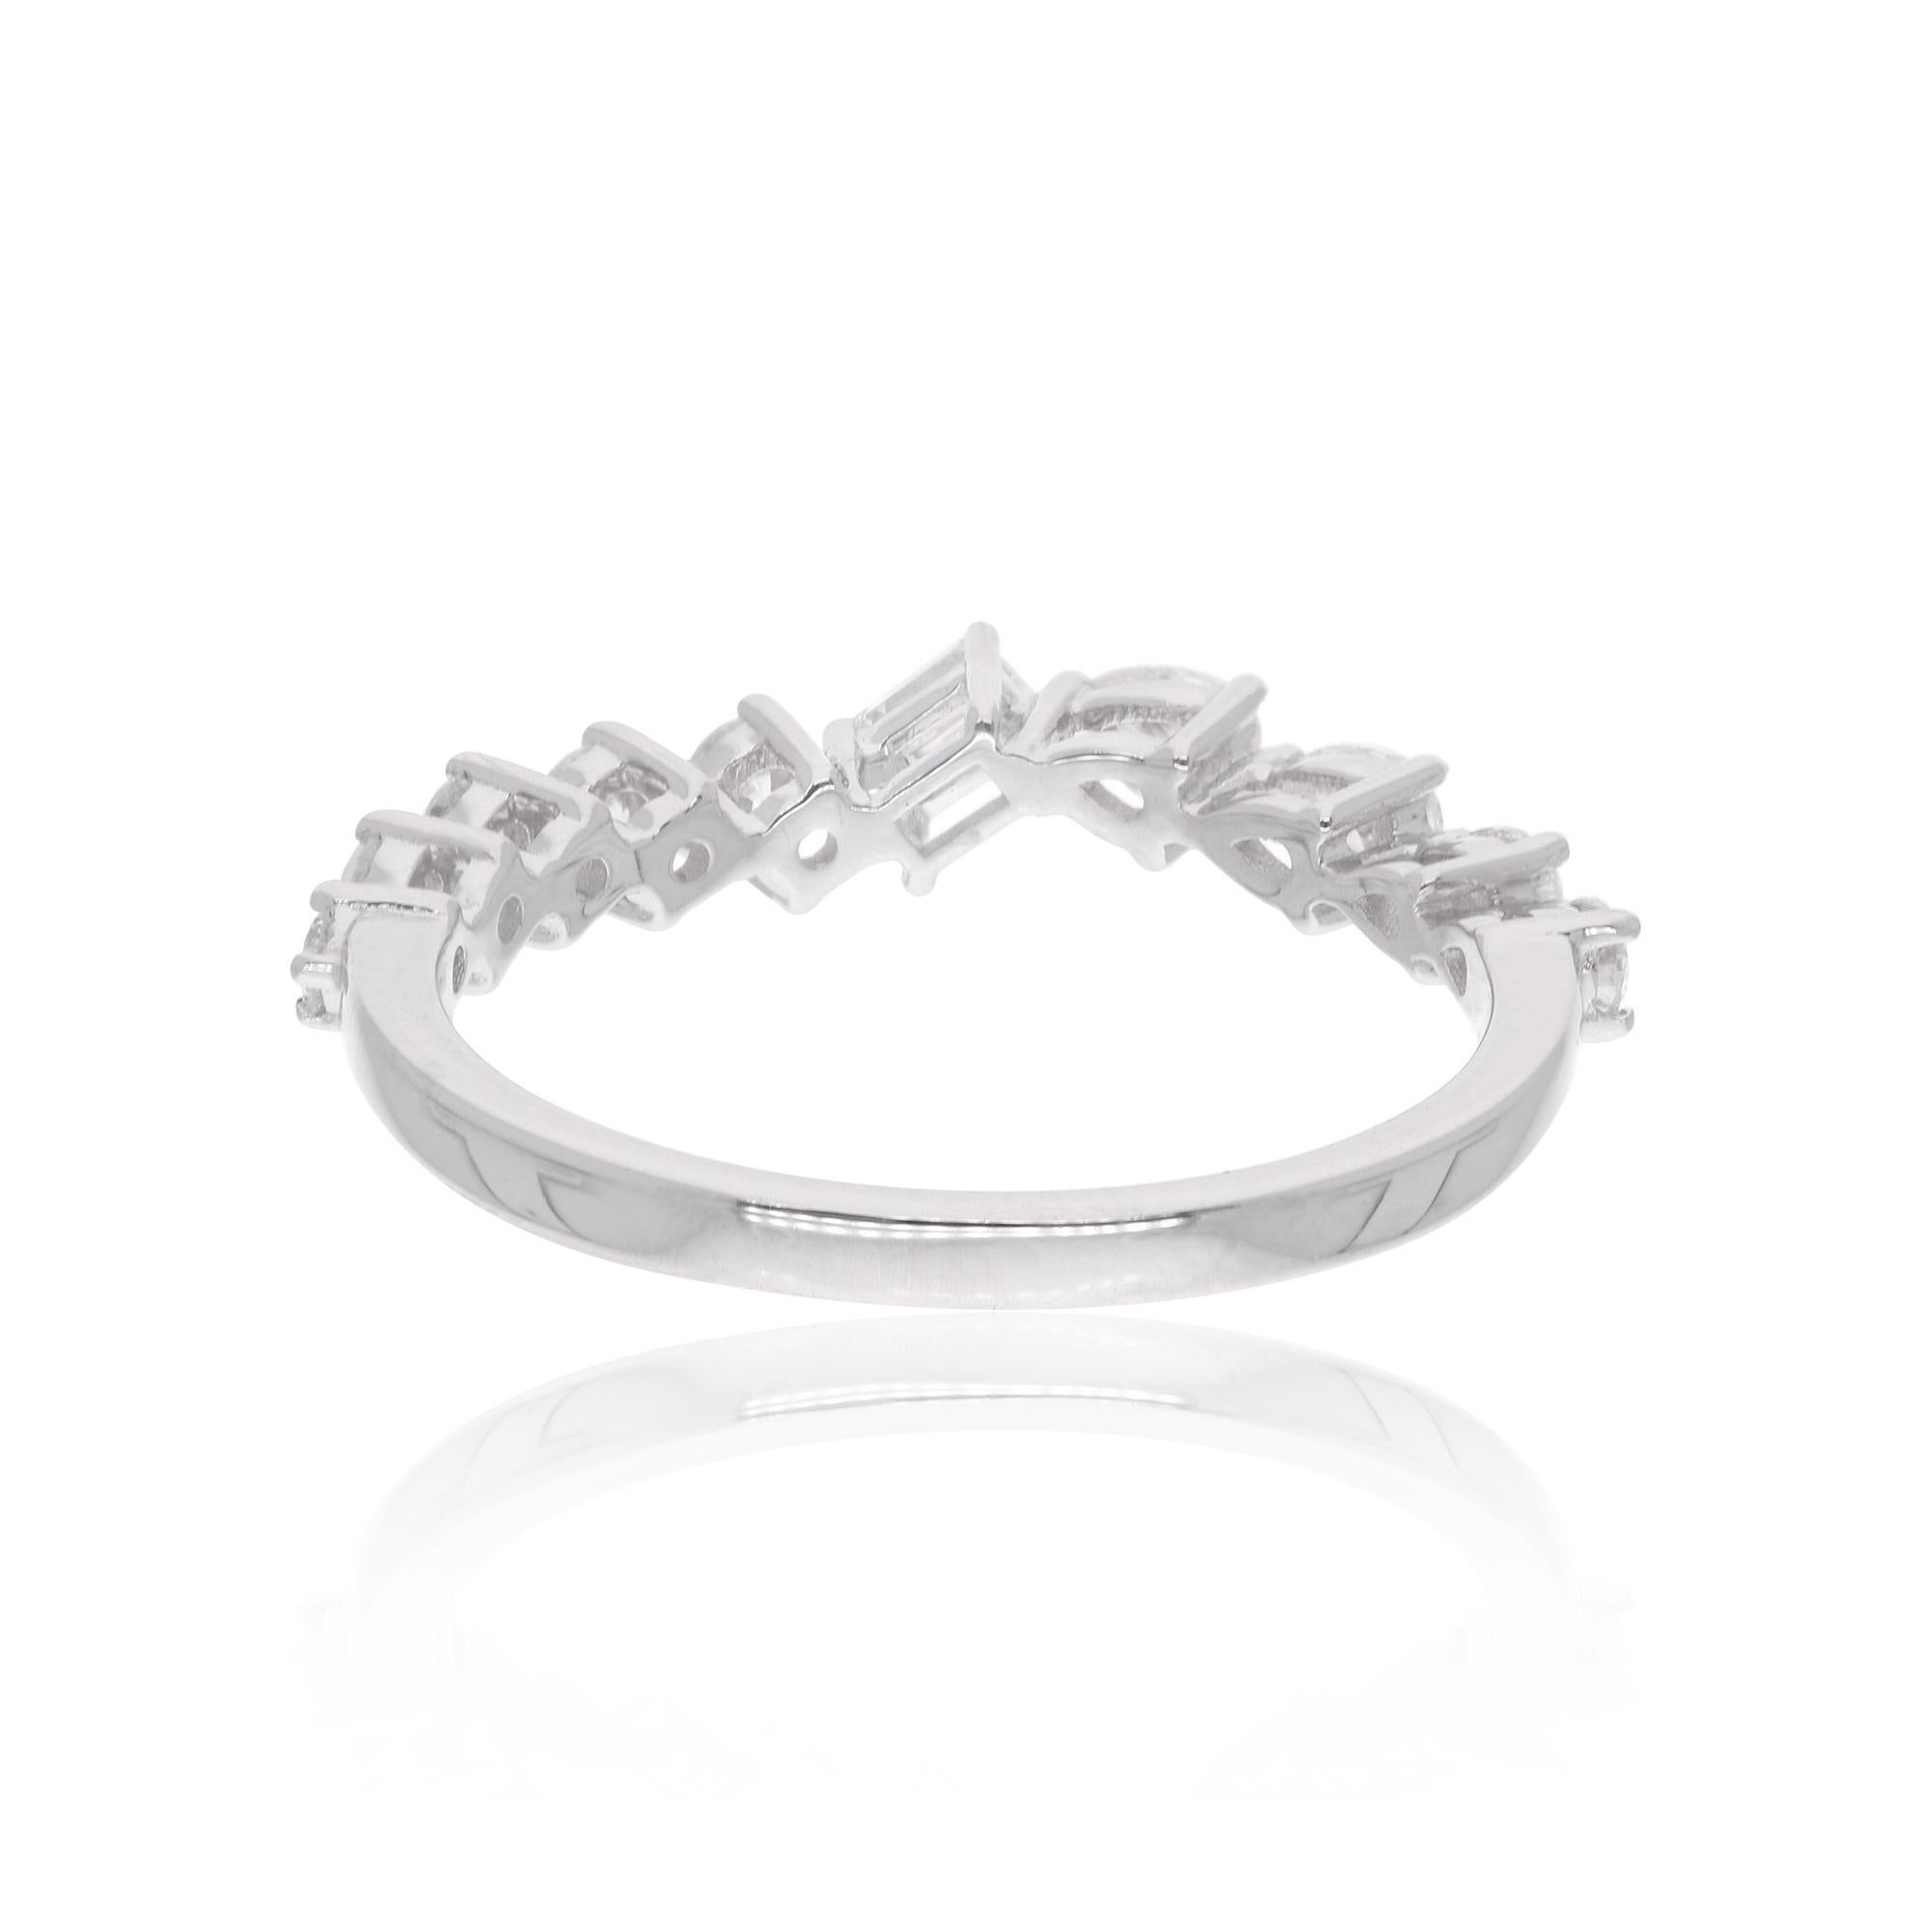 The half eternity band design of the ring symbolizes eternal love and commitment, making it a popular choice for engagement rings or anniversary gifts. It can also be worn as a standalone piece or stacked with other rings for a personalized and